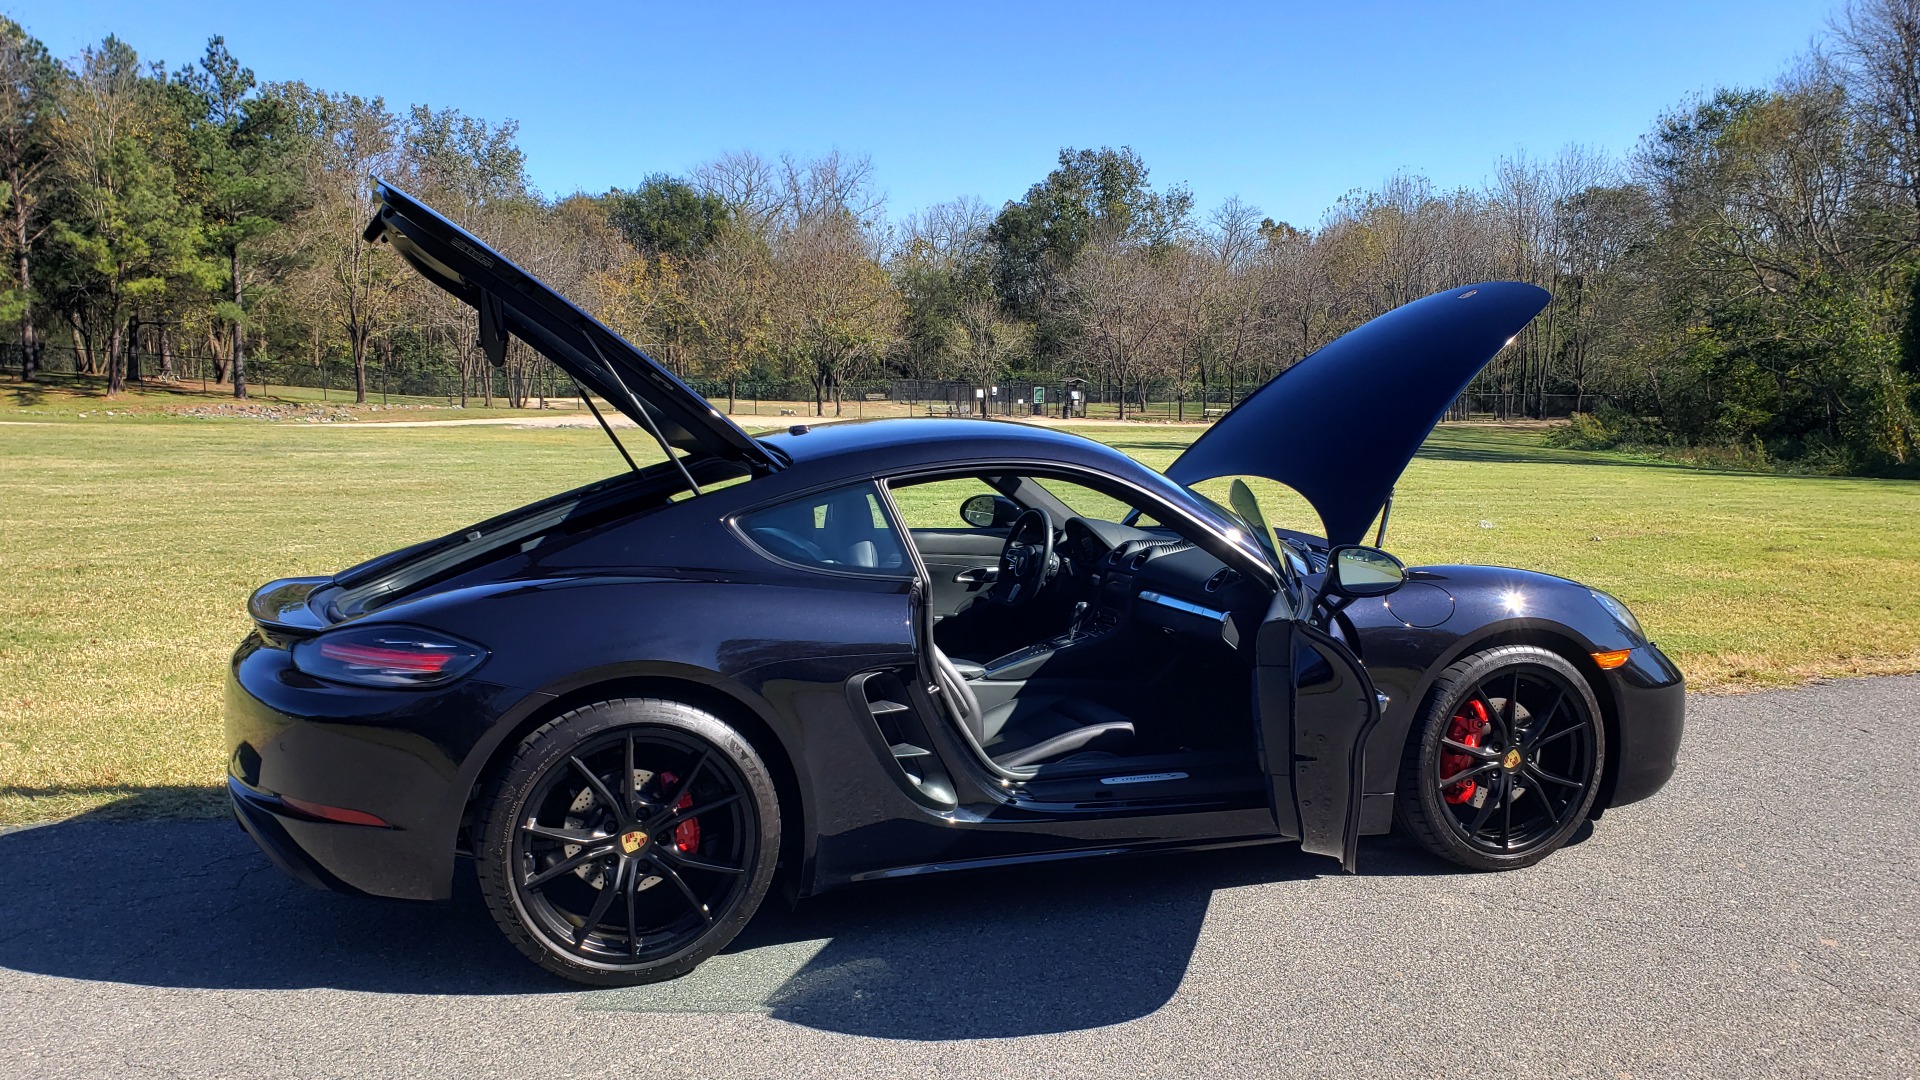 Used 2019 Porsche 718 CAYMAN S COUPE / PDK TRANS / LCA / BOSE / HTD STS / LIGHT DESIGN PKG for sale Sold at Formula Imports in Charlotte NC 28227 25